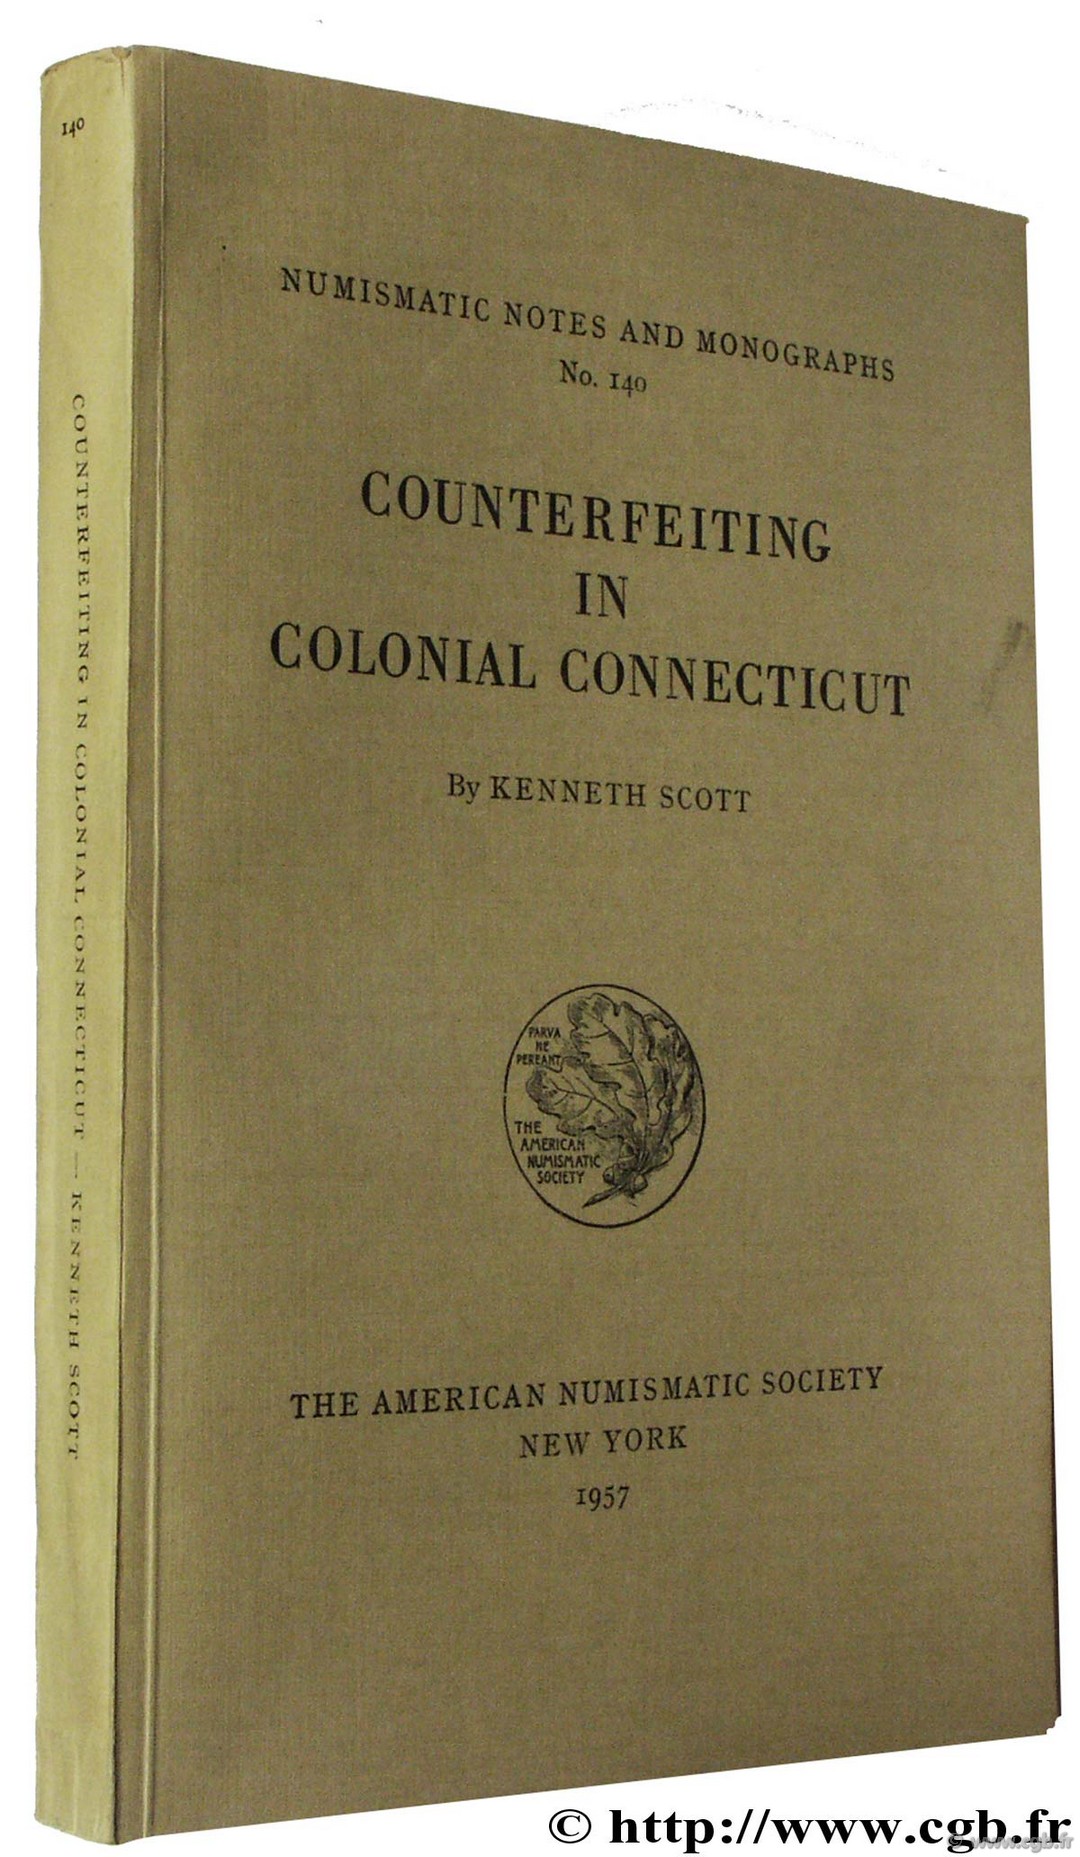 Counterfeiting in Colonial Connecticut, NNM n° 140 SCOTT K.